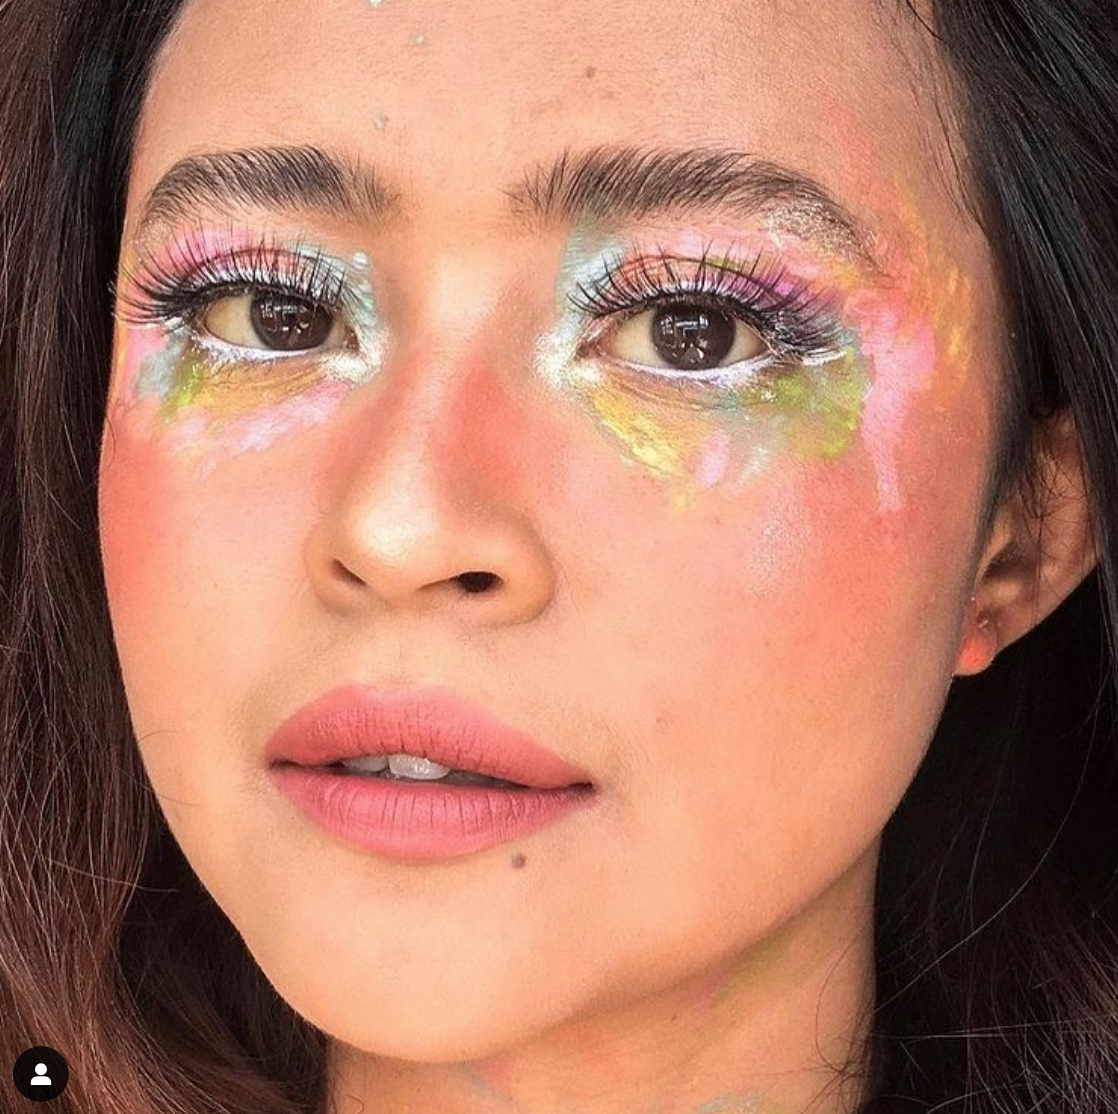 The Latest TikTok Beauty Trends: Try These Viral Makeup Hacks